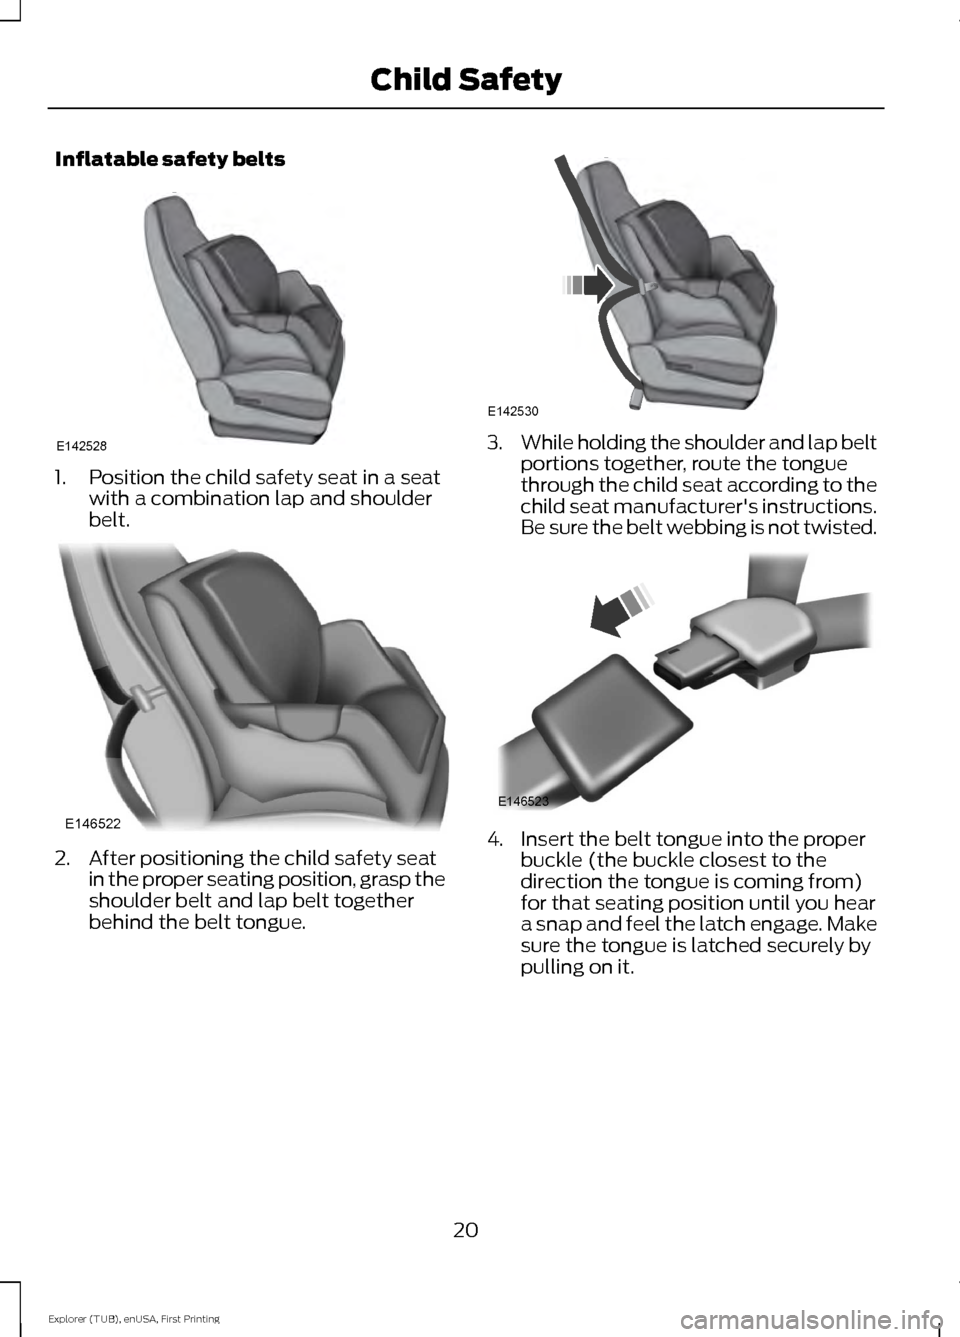 FORD EXPLORER 2016 5.G Owners Manual Inflatable safety belts
1. Position the child safety seat in a seat
with a combination lap and shoulder
belt. 2. After positioning the child safety seat
in the proper seating position, grasp the
shoul